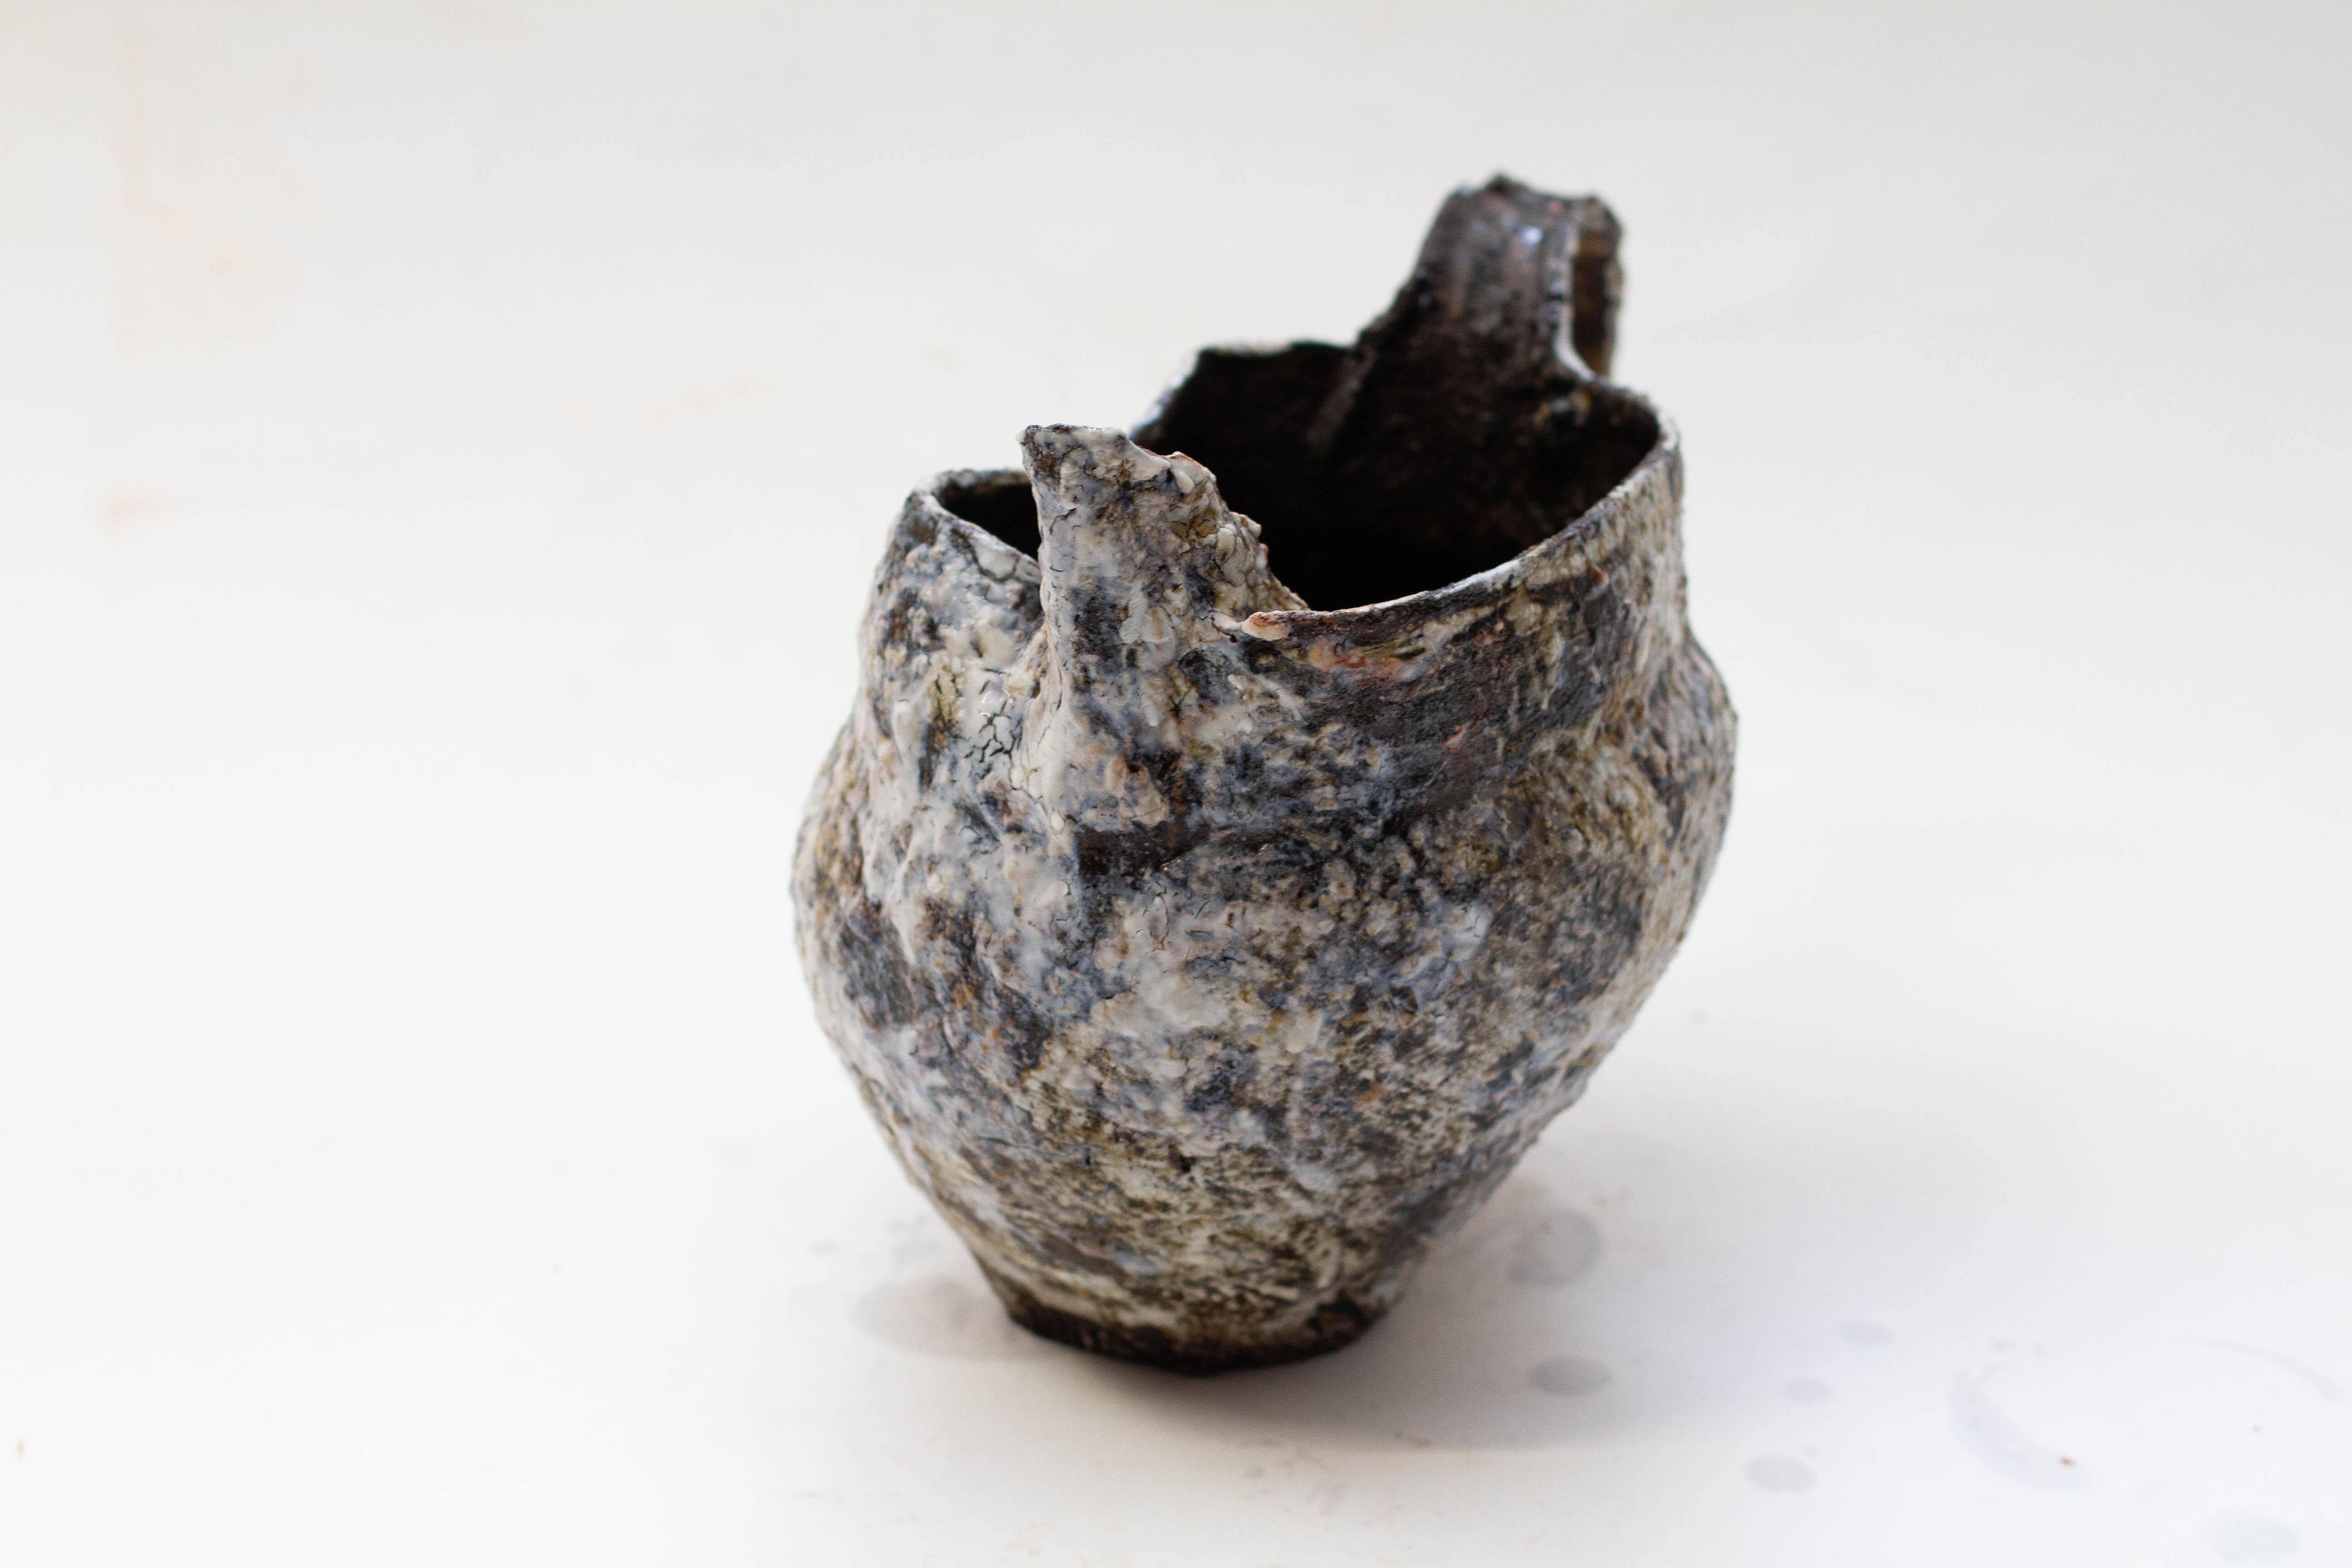 Made of a chunky black clay, washed with porcelain, and glazed with various white glazes together with beech ash. The process and alchemic reaction gives moments of naturally occurring pinks and blue, with what appears like a rusty patina on the